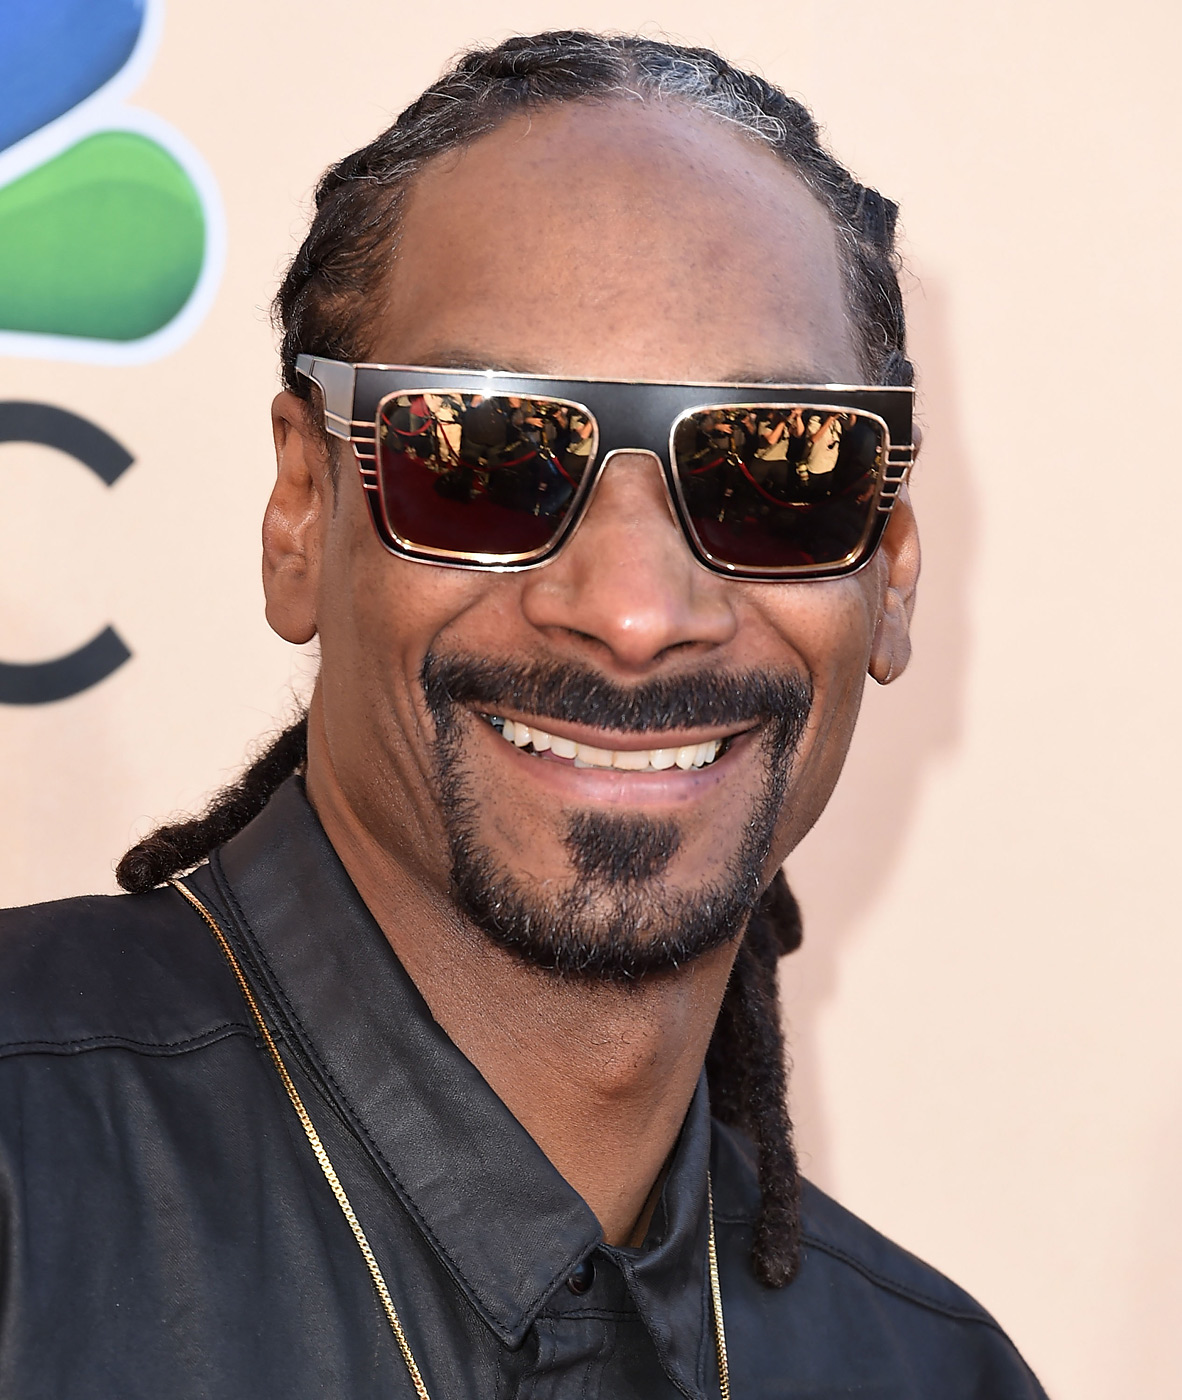 https://static.wikia.nocookie.net/ideas/images/9/98/Snoop-dogg.jpg/revision/latest?cb=20200812231338